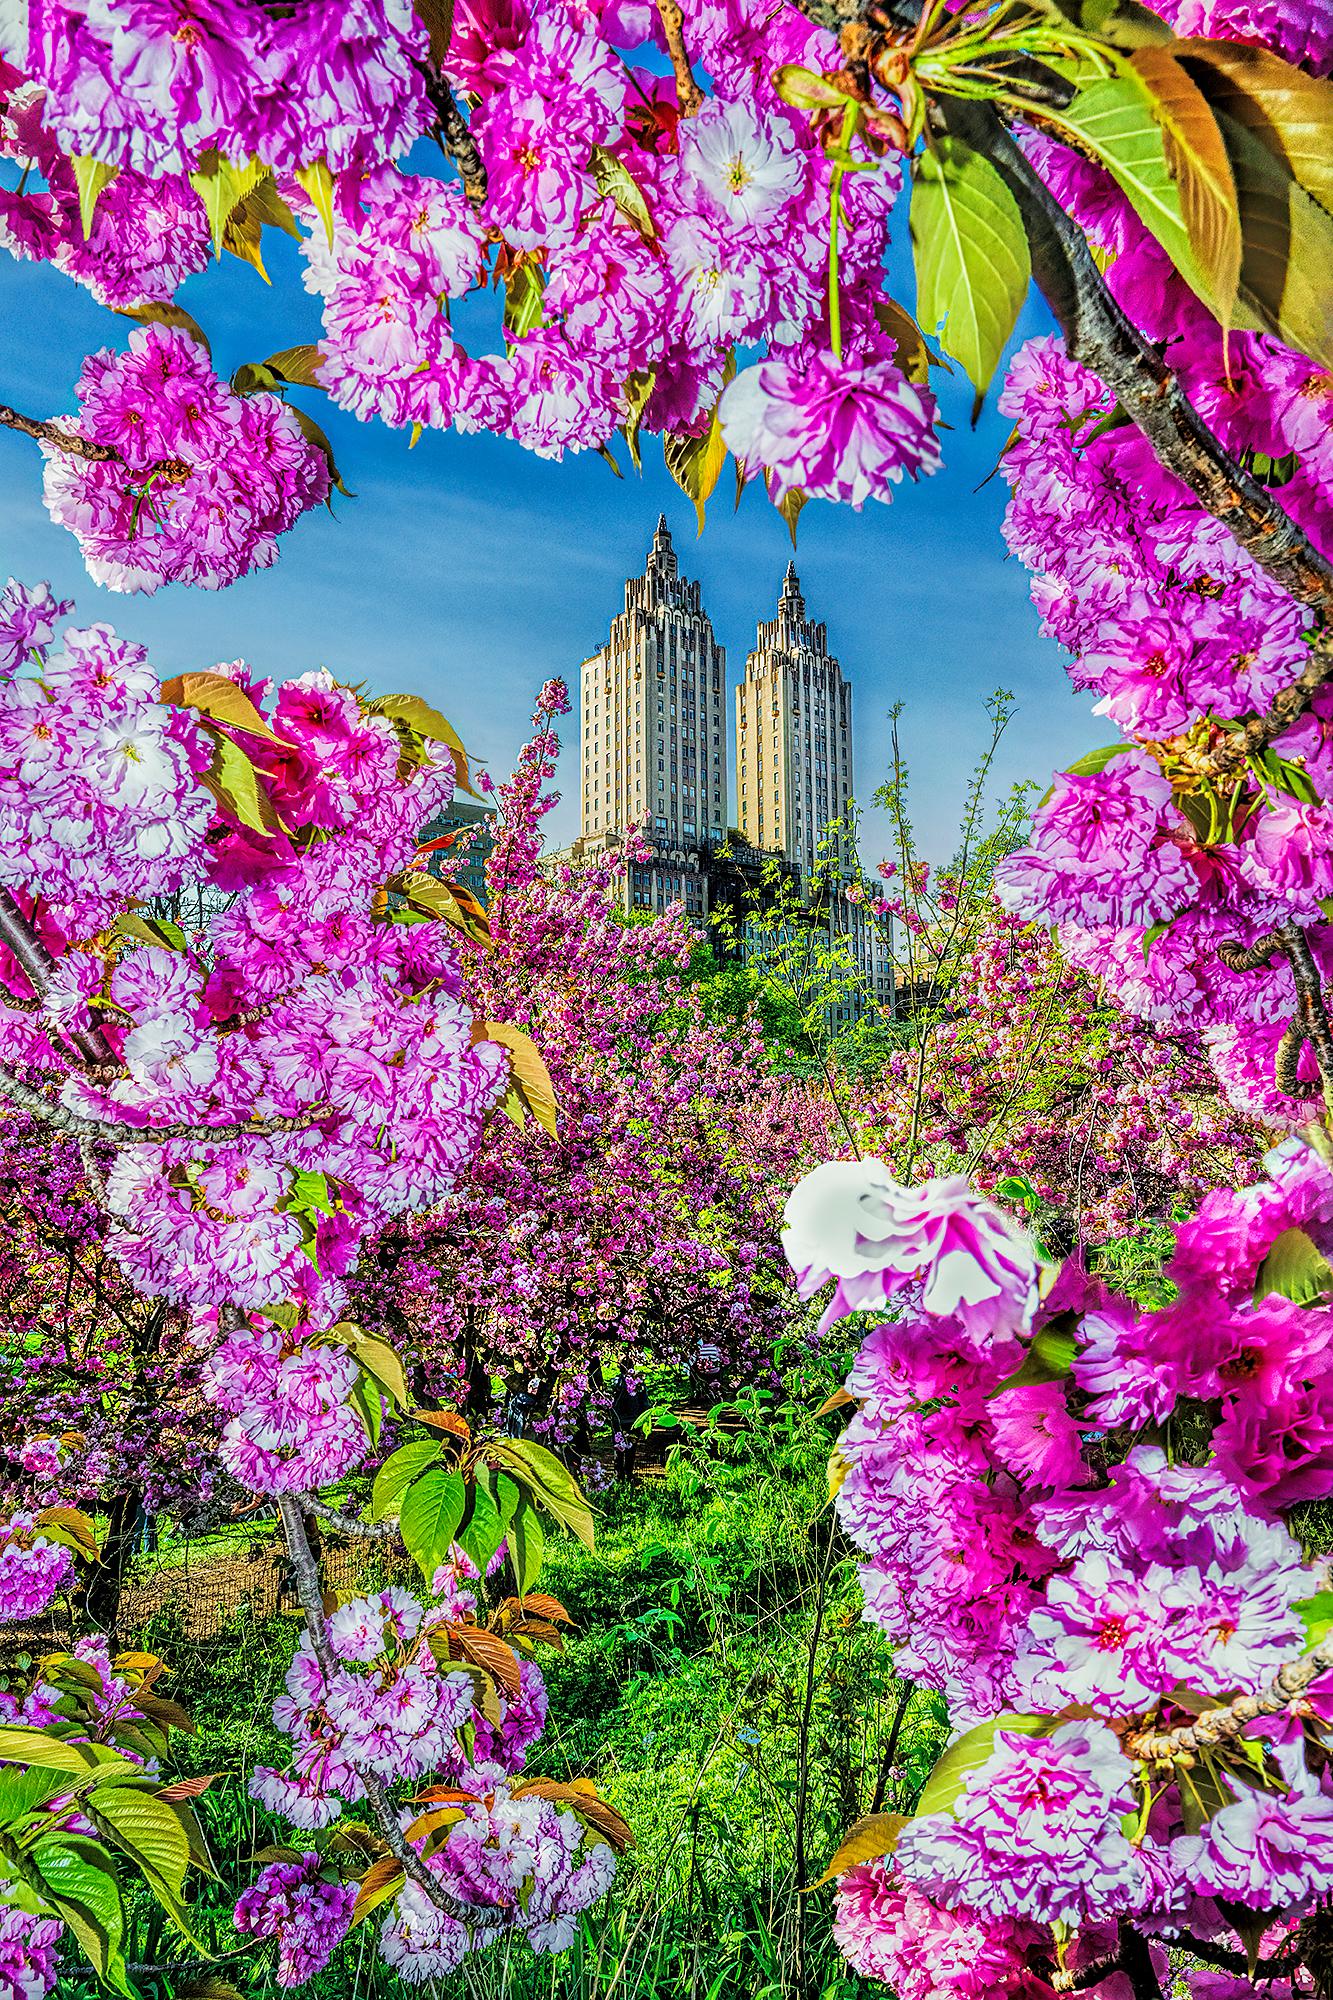 The San Remo Central Park West Framed by Cherry Blossoms Flowers - Photograph by Mitchell Funk